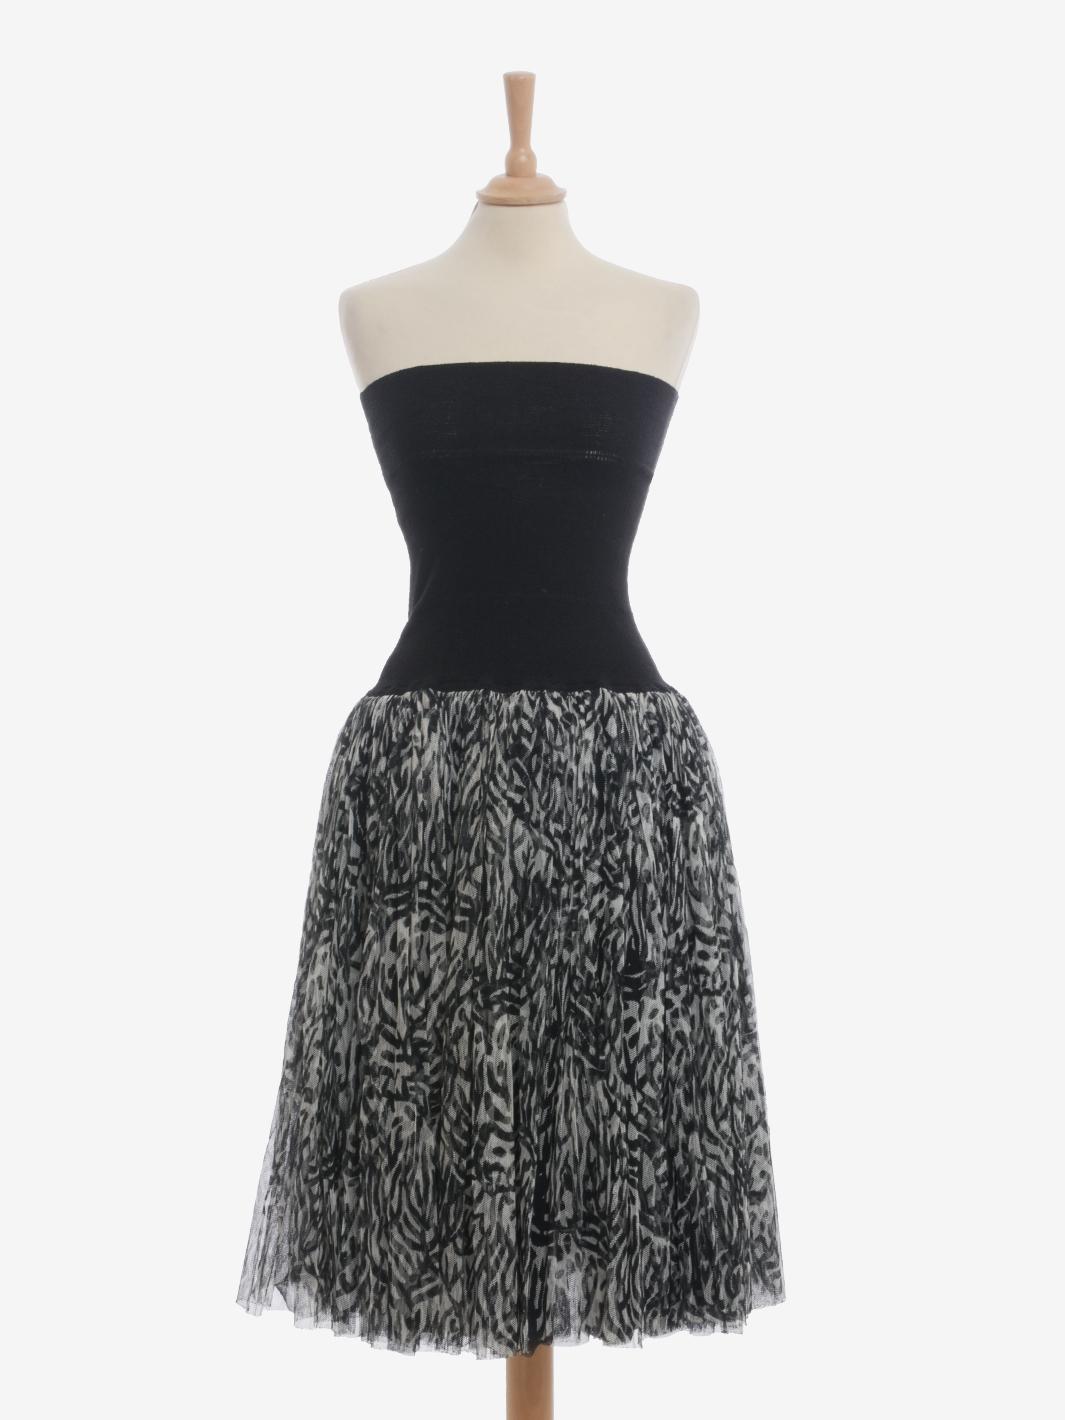 Missoni Tulle Cocktail Dress is a dress with an elasticized bandeau top contrasted with a voluminous bell-shaped skirt made of several layers of tulle with an animalier pattern.

CONDITION
Very good vintage condition

LABEL
Missoni - Made in